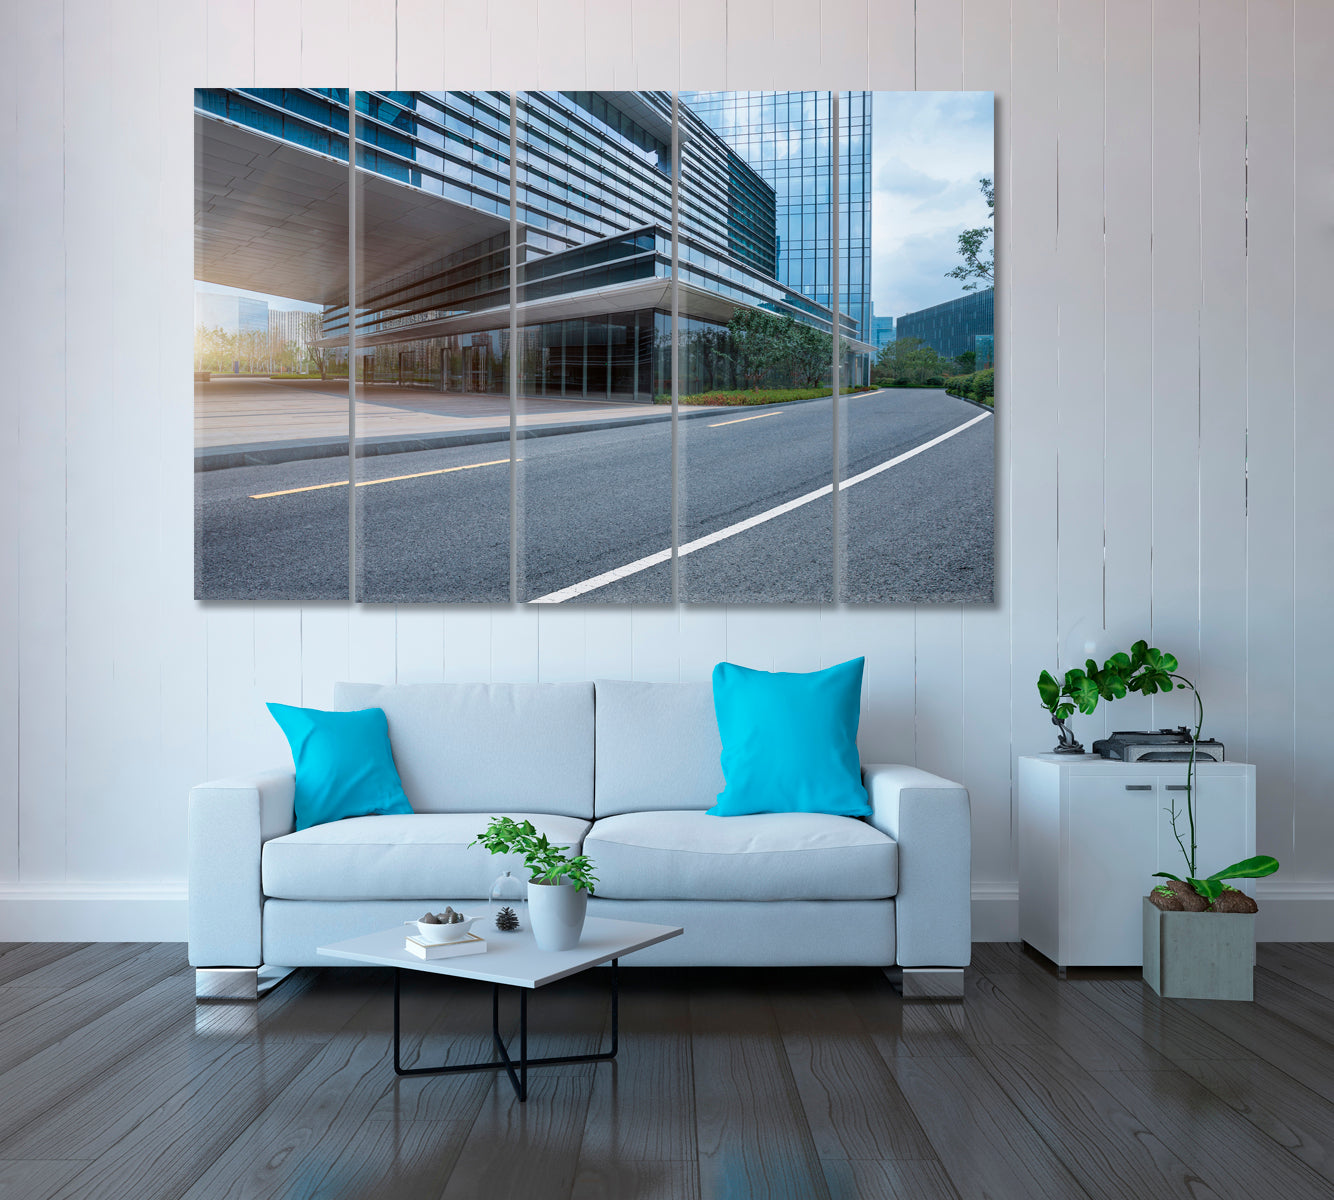 Empty Road and Office Building in Shanghai Canvas Print ArtLexy 5 Panels 36"x24" inches 